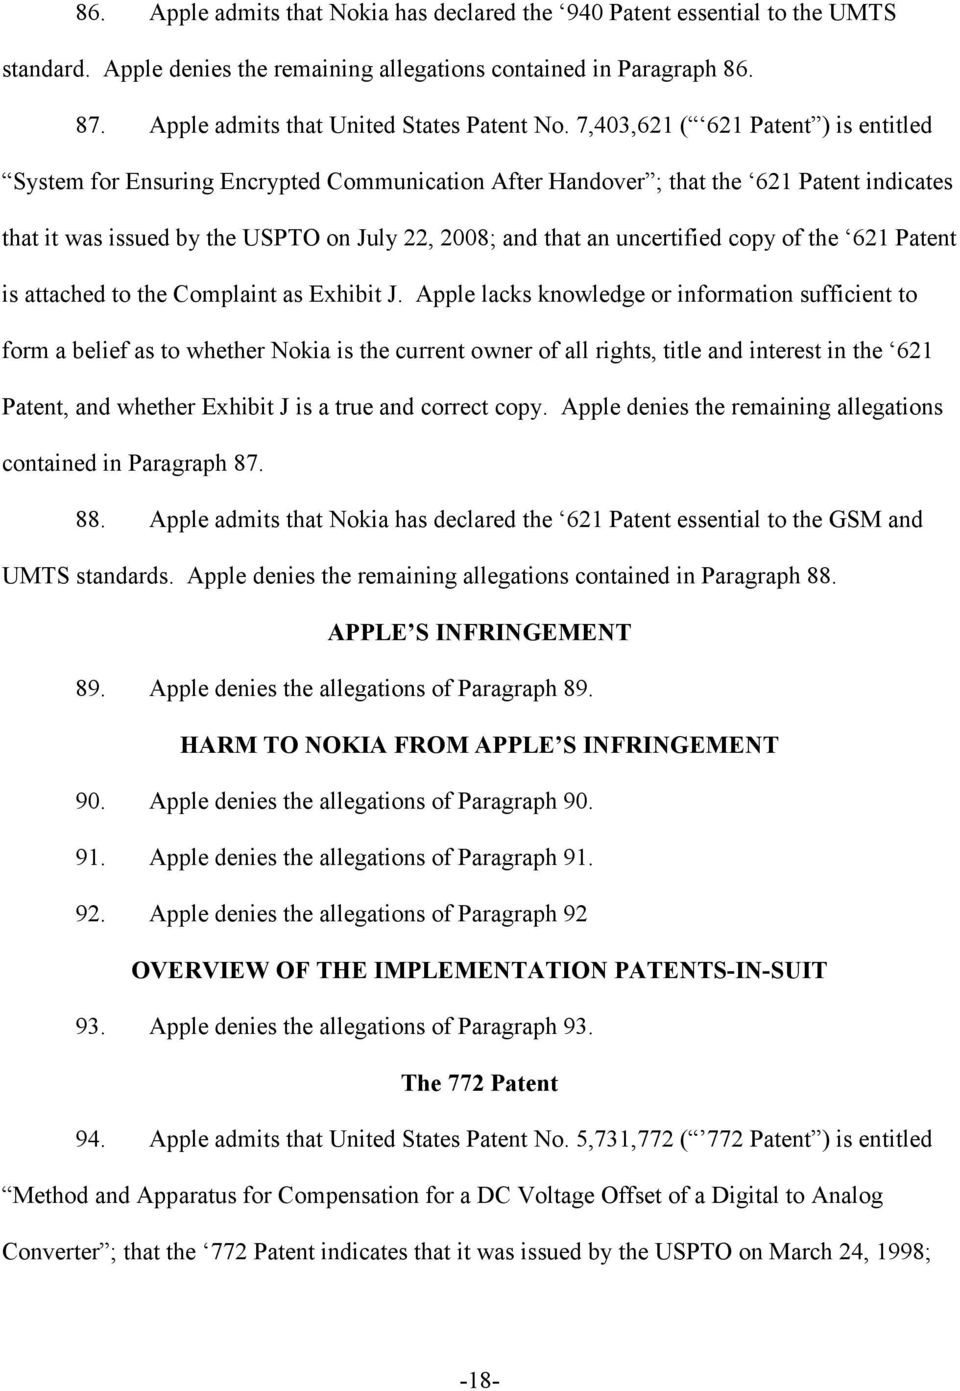 uncertified copy of the 621 Patent is attached to the Complaint as Exhibit J.